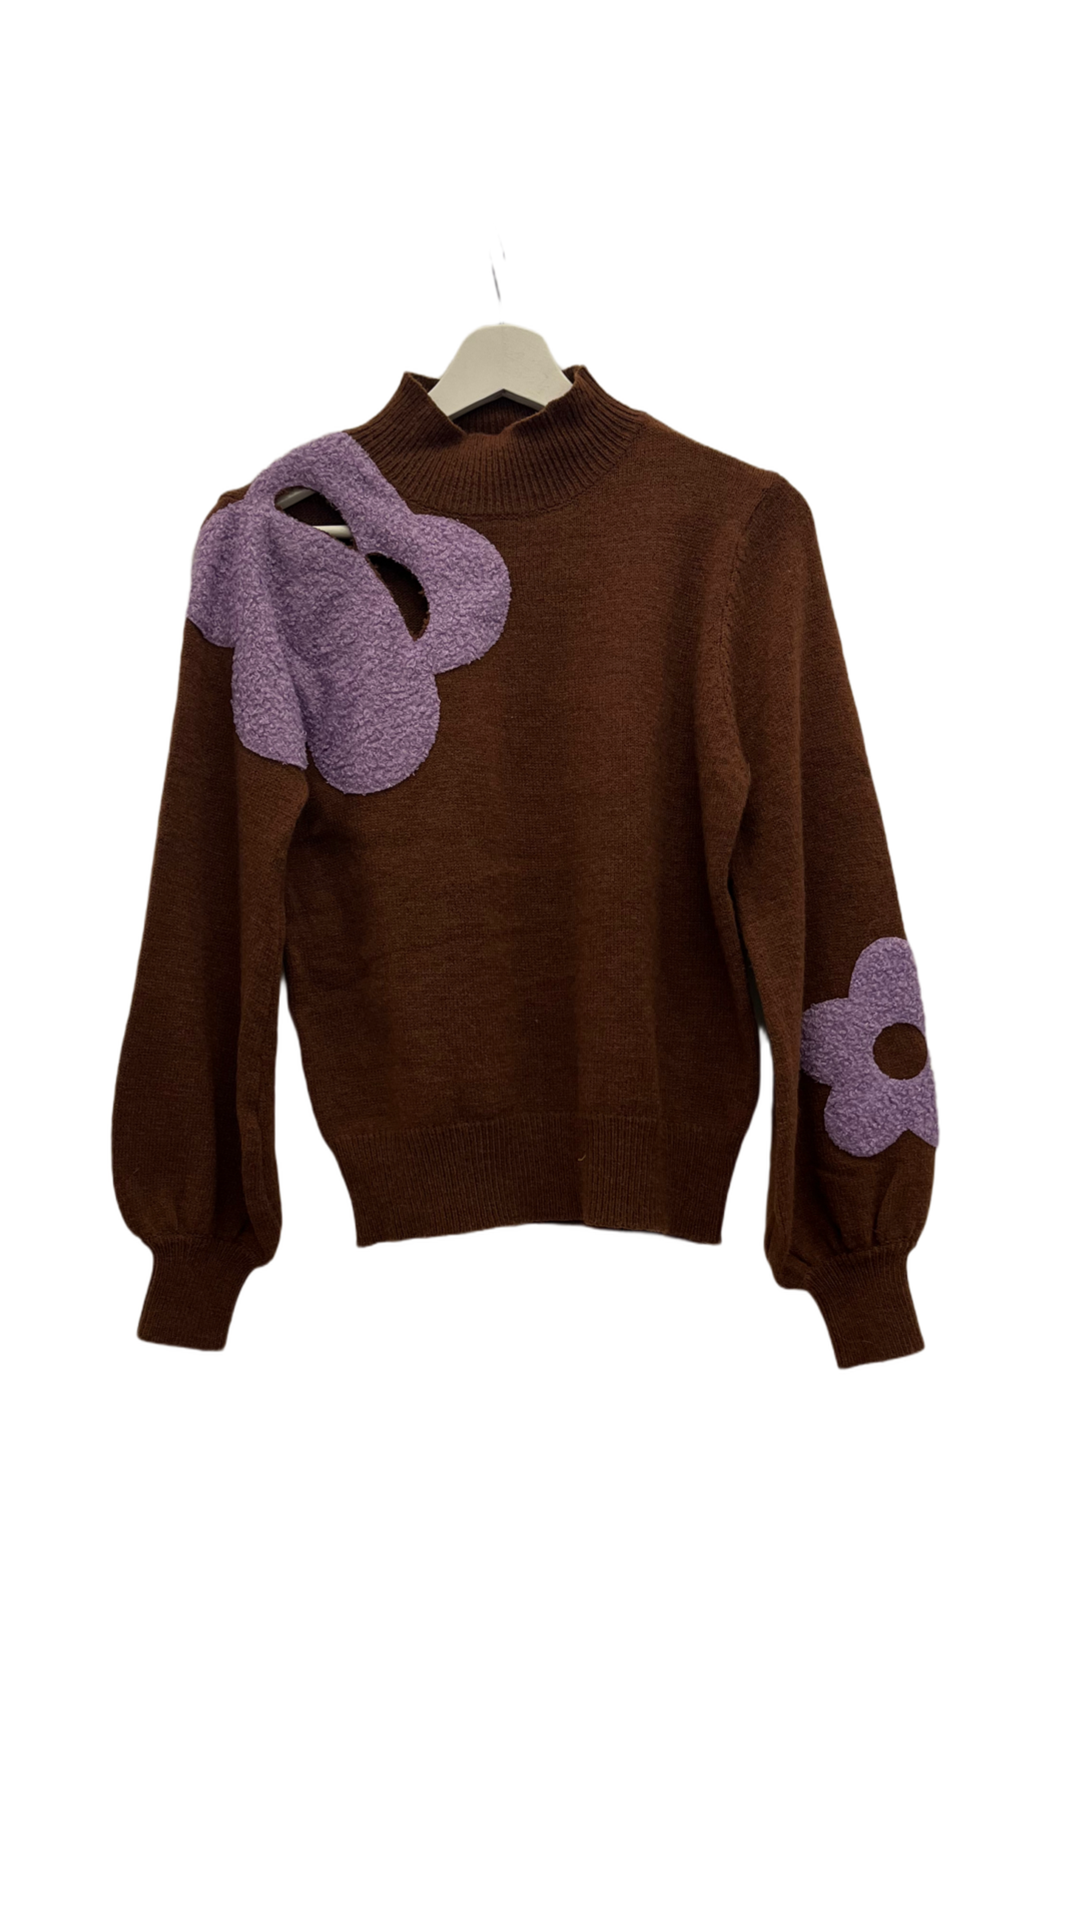 Chenee Cut out Sweater